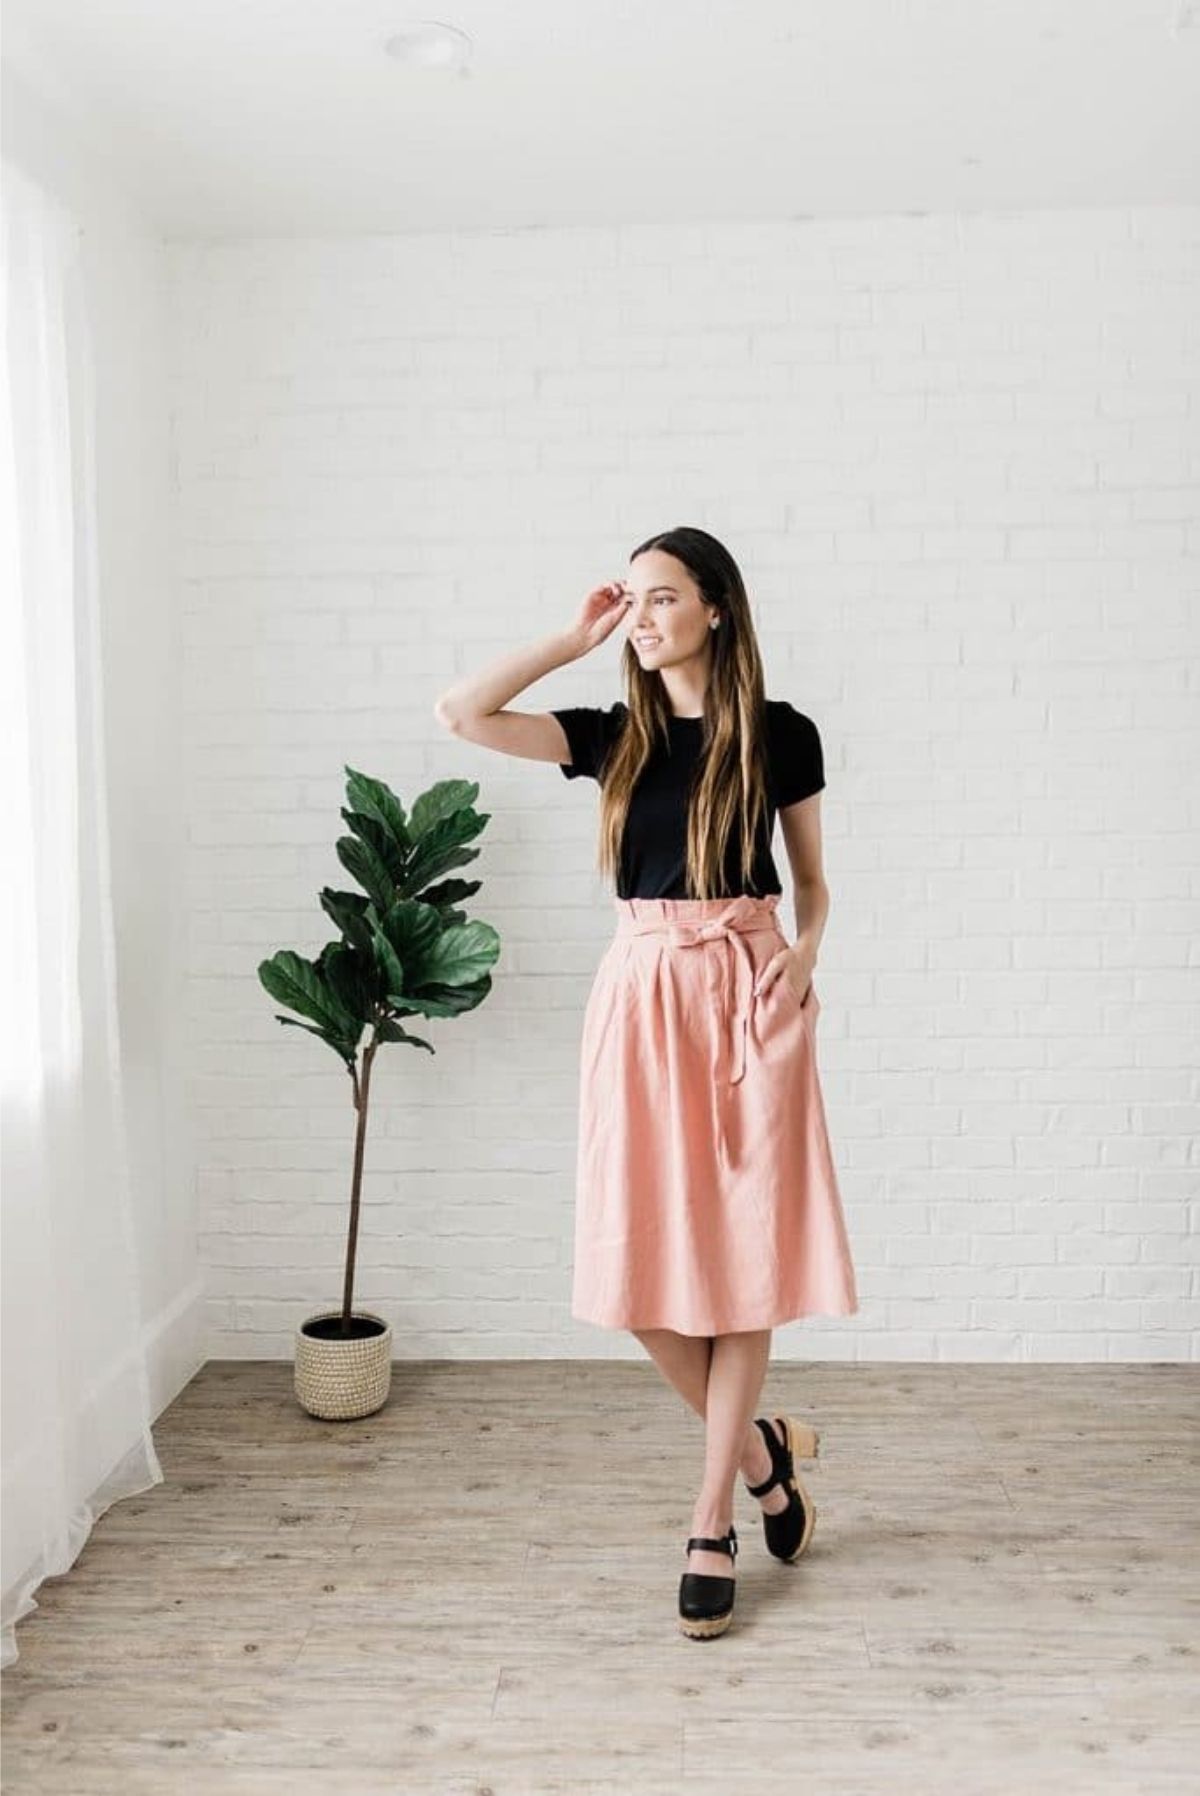 A high waisted skirt is an example of trendy modest clothing